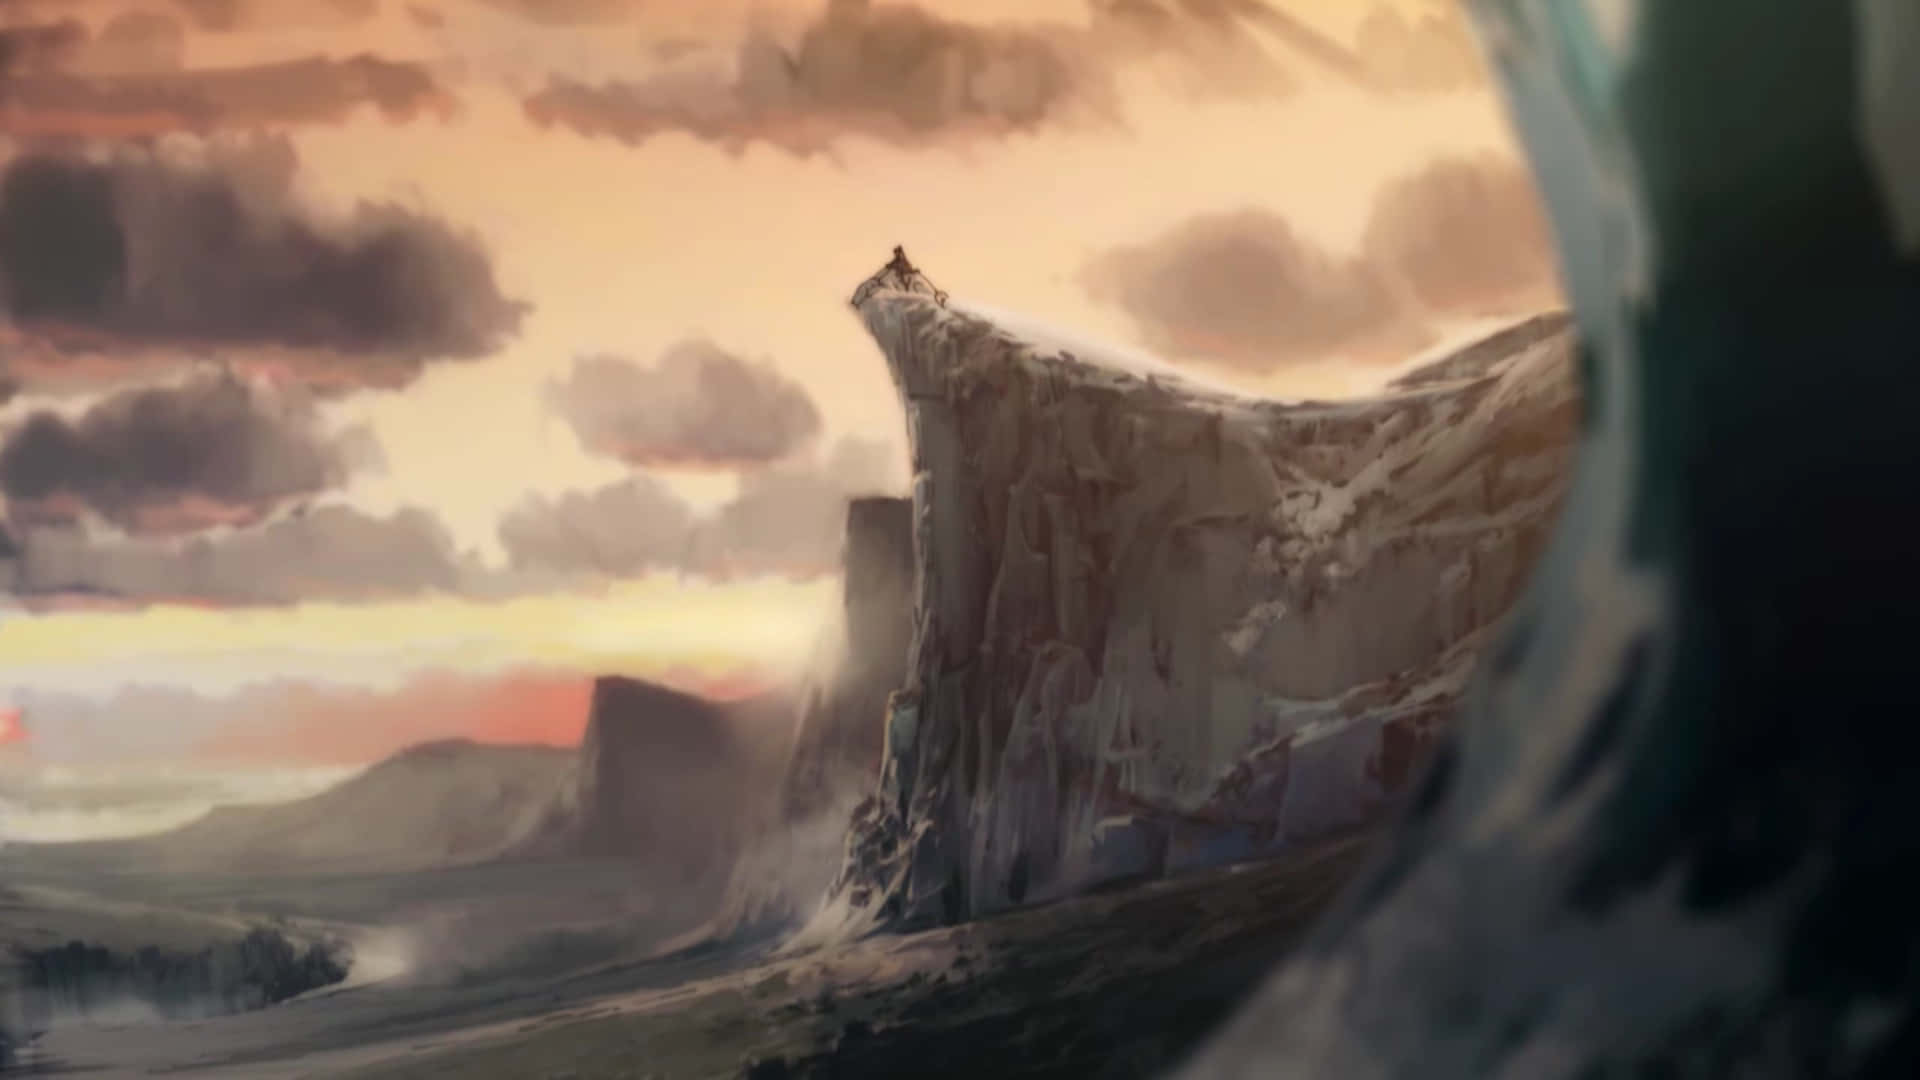 Korra’s Fight For Balance In An Uncertain World Background